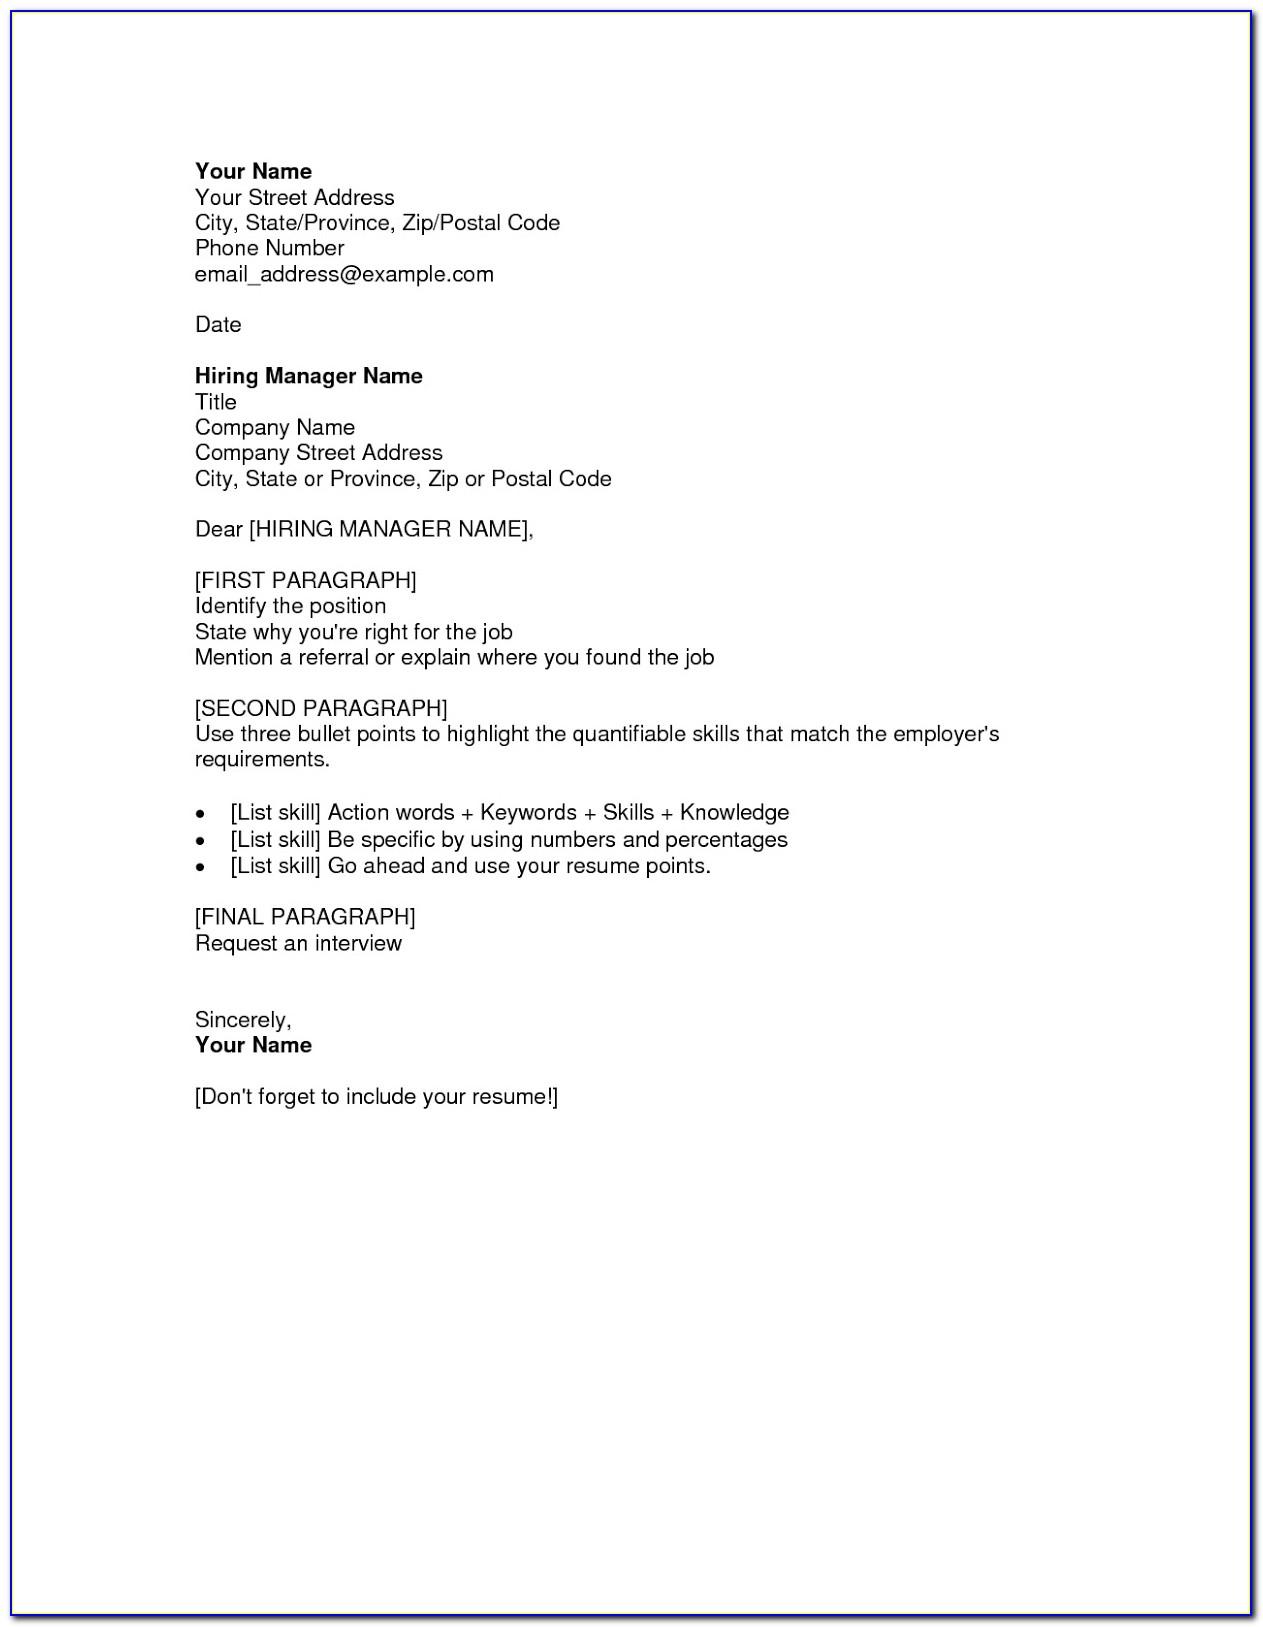 Resume Cover Letter Template Free